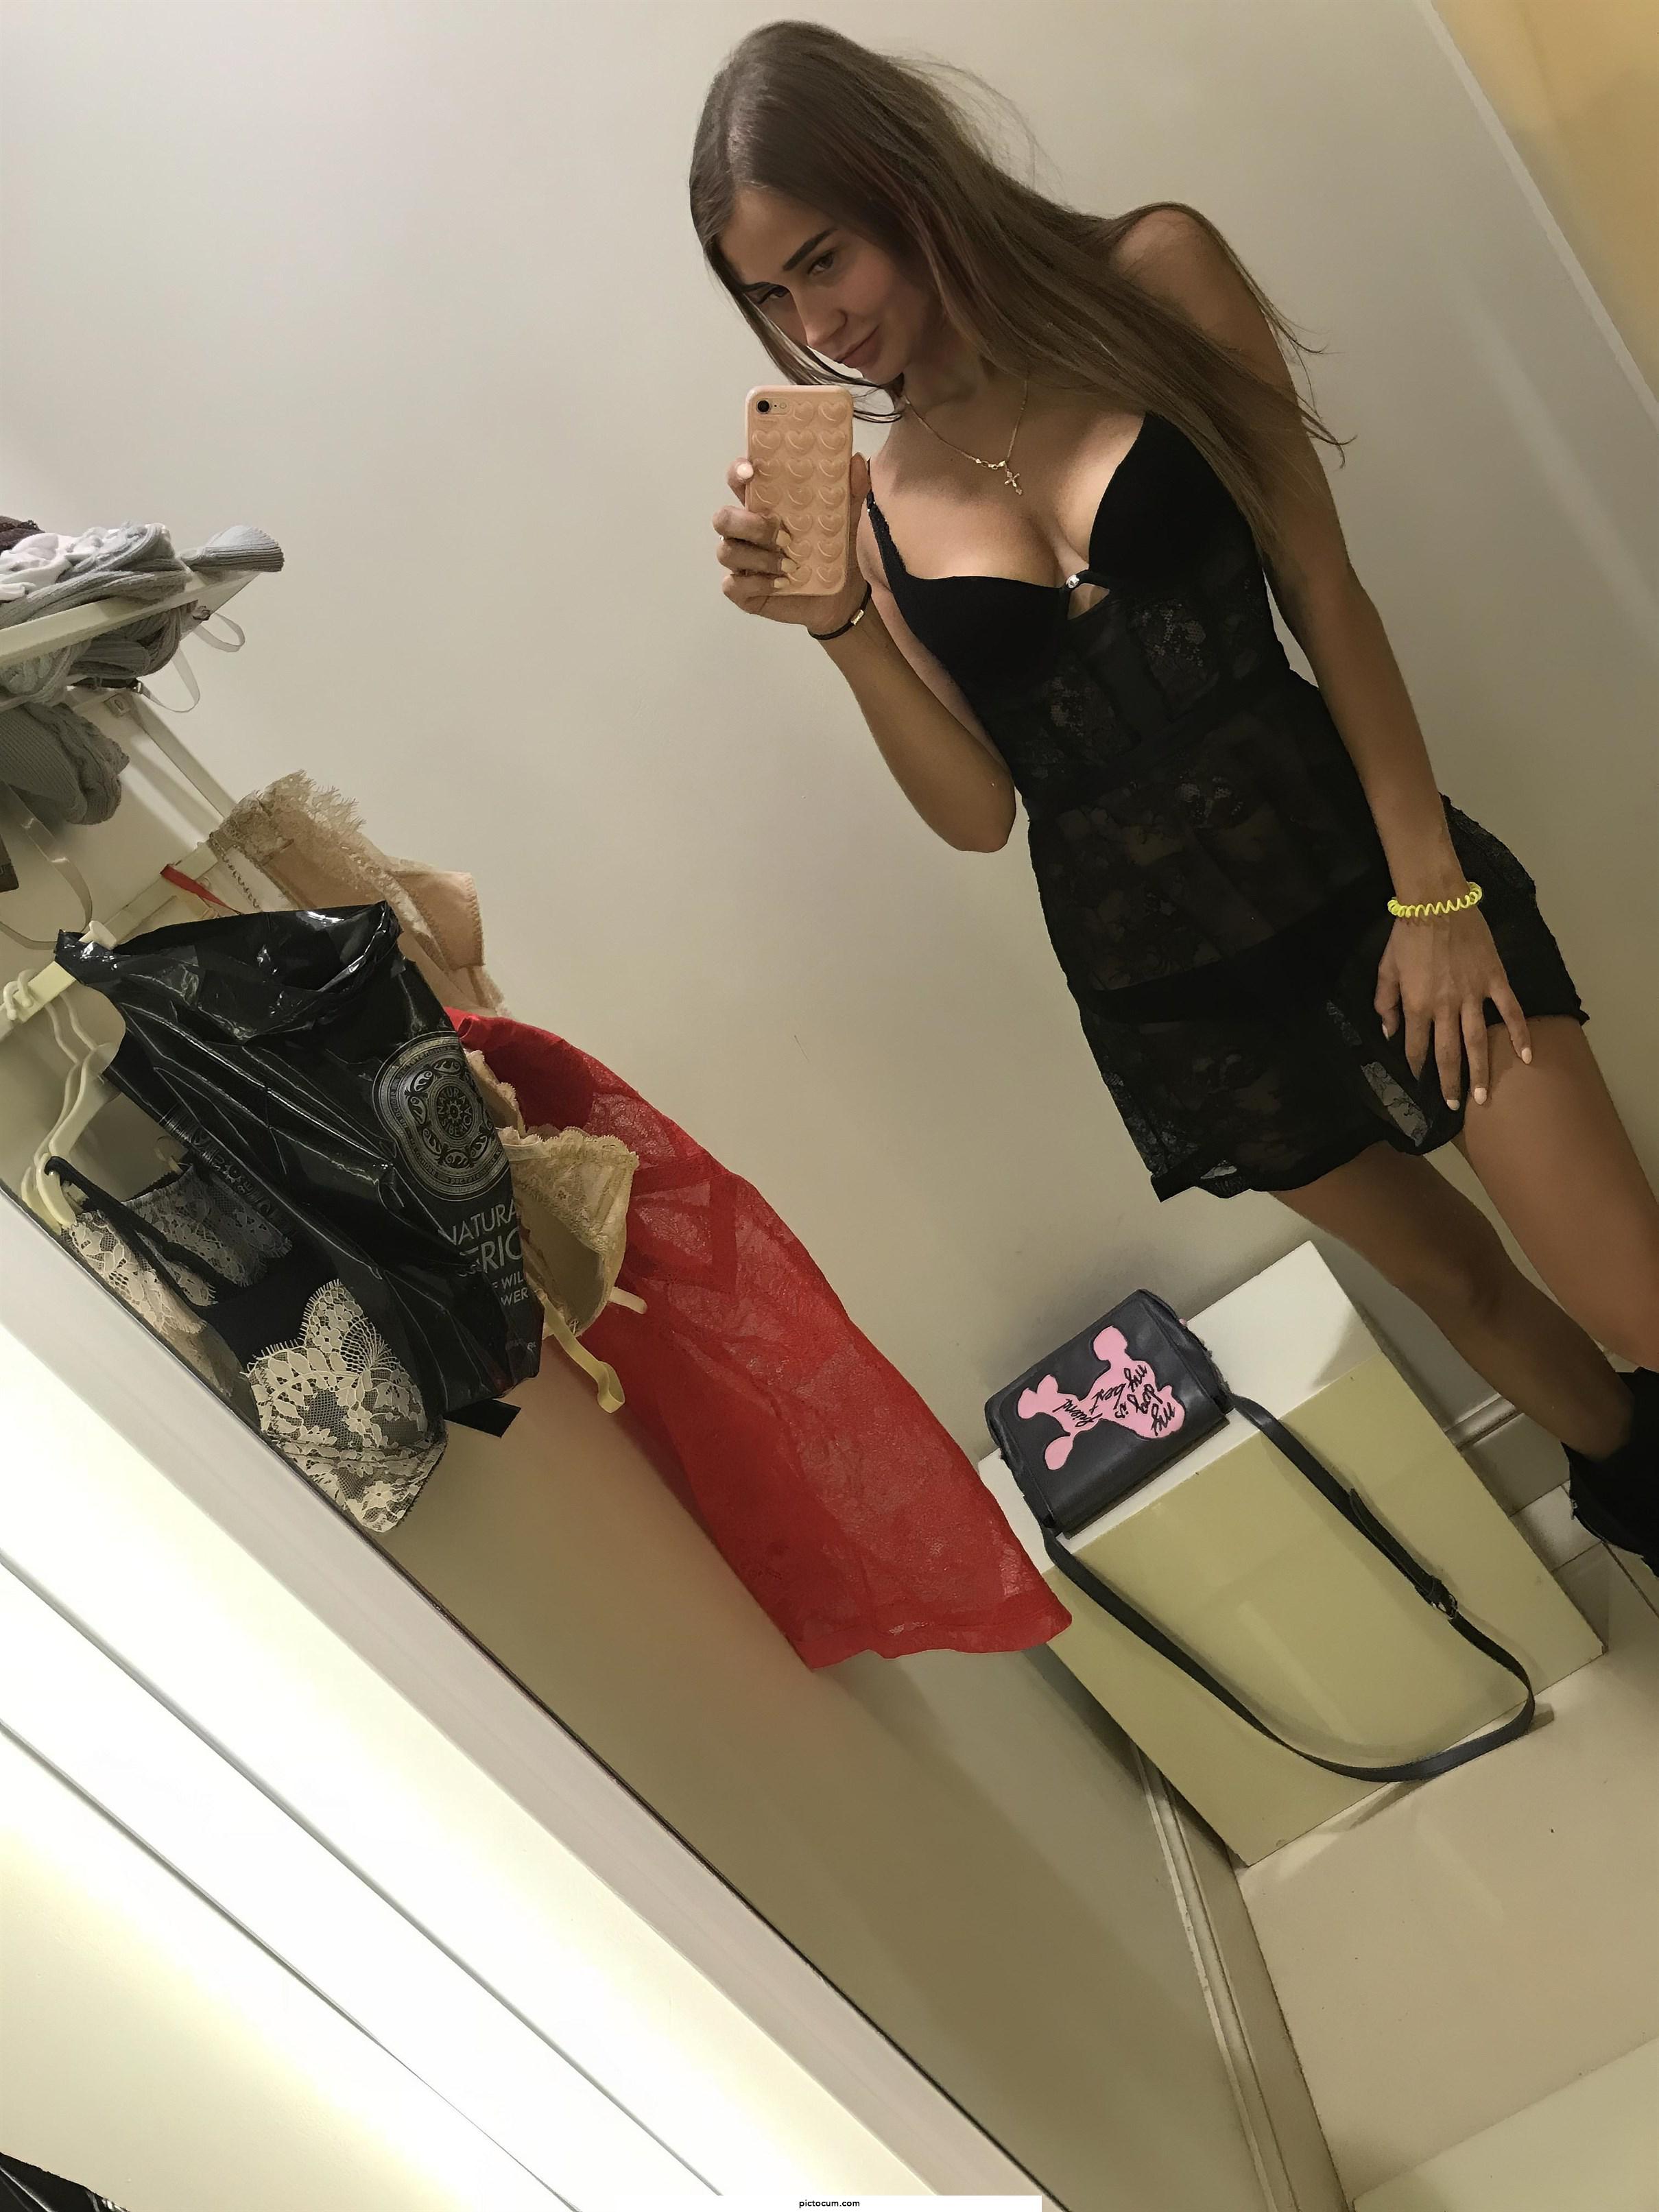 Should I buy this sexy dress